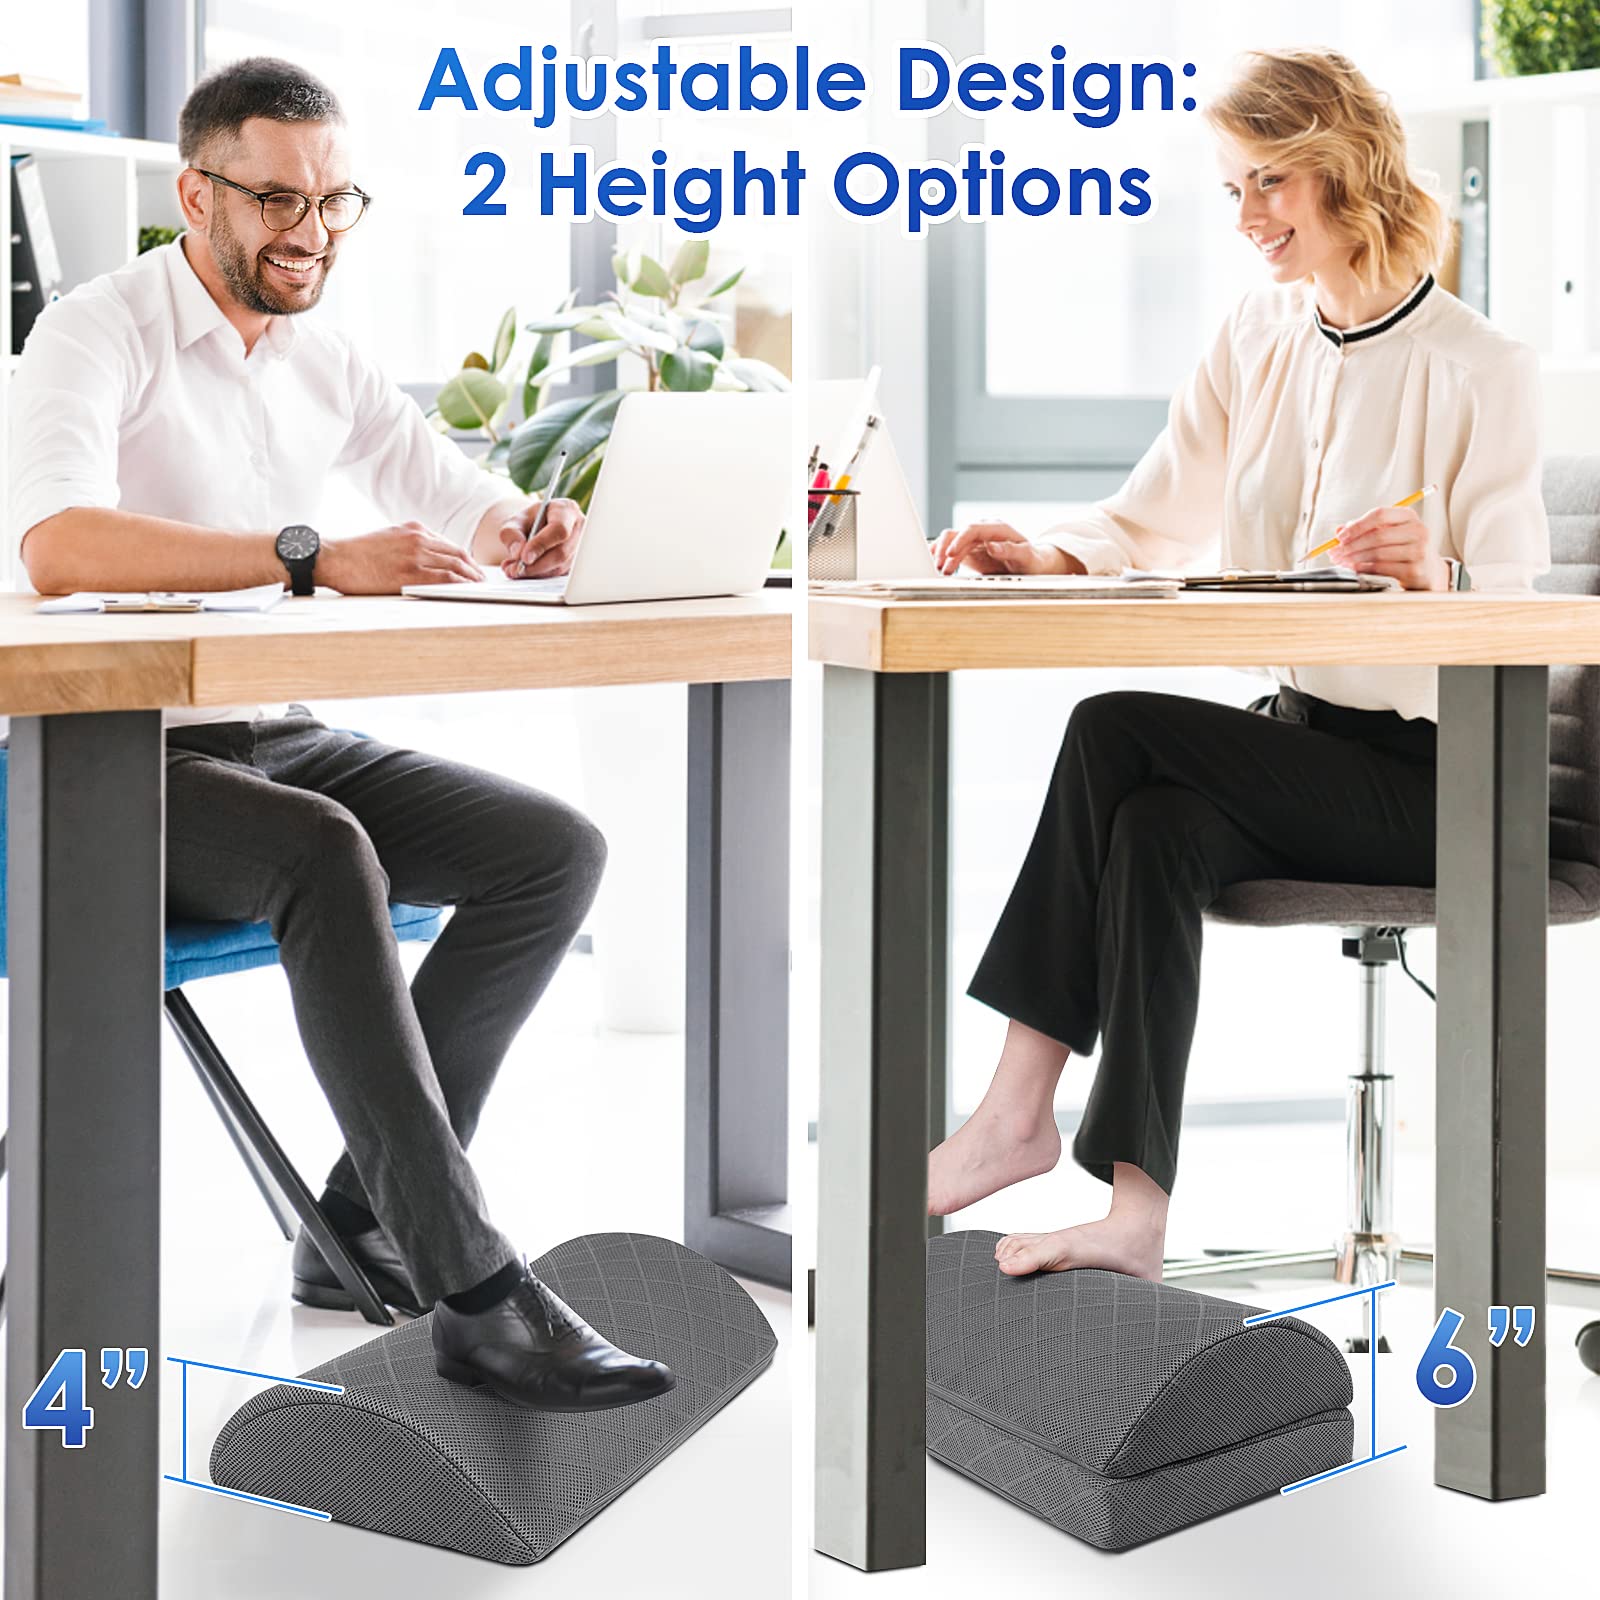 CushZone Foot Rest for Under Desk at Work Adjustable Foam for Office, Work, Gaming, Computer, Gift, Home Office Accessories Back & Hip Pain Relief (Grey)